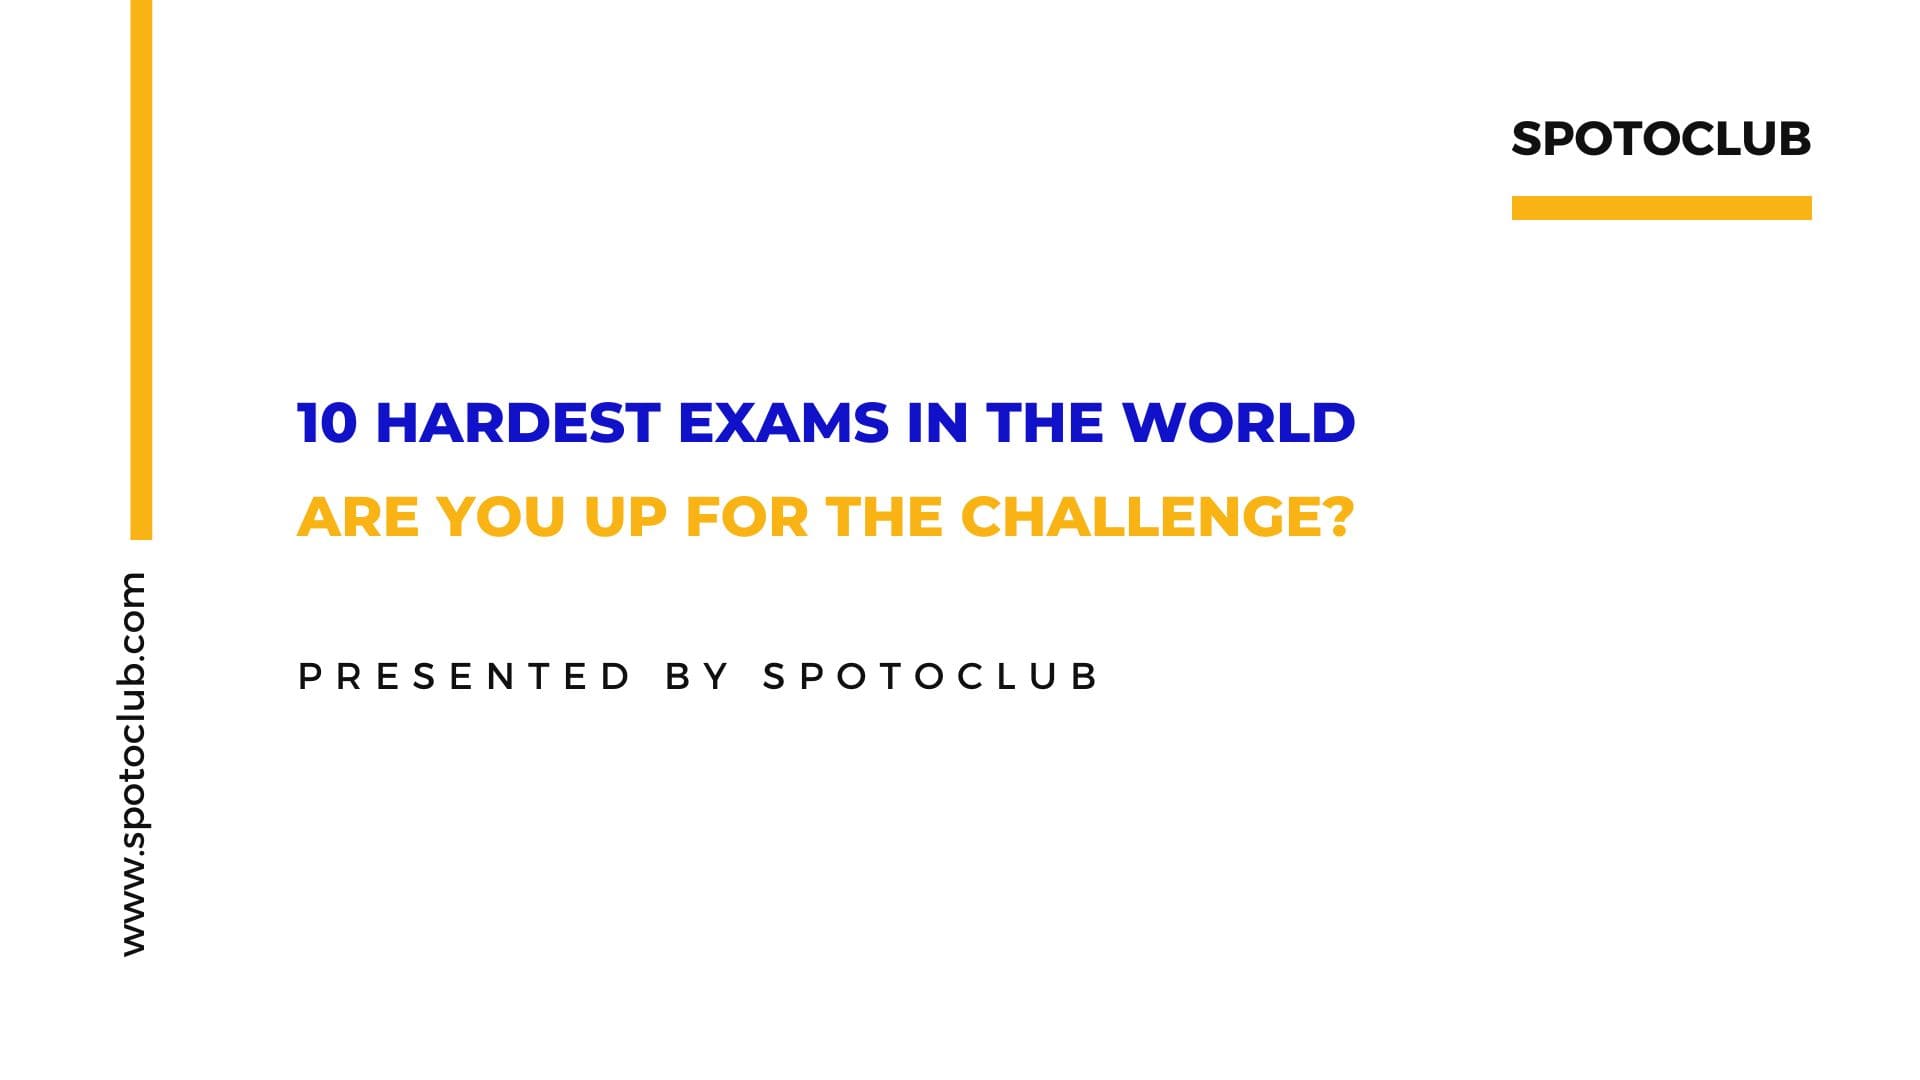 10 Hardest Exams in the World